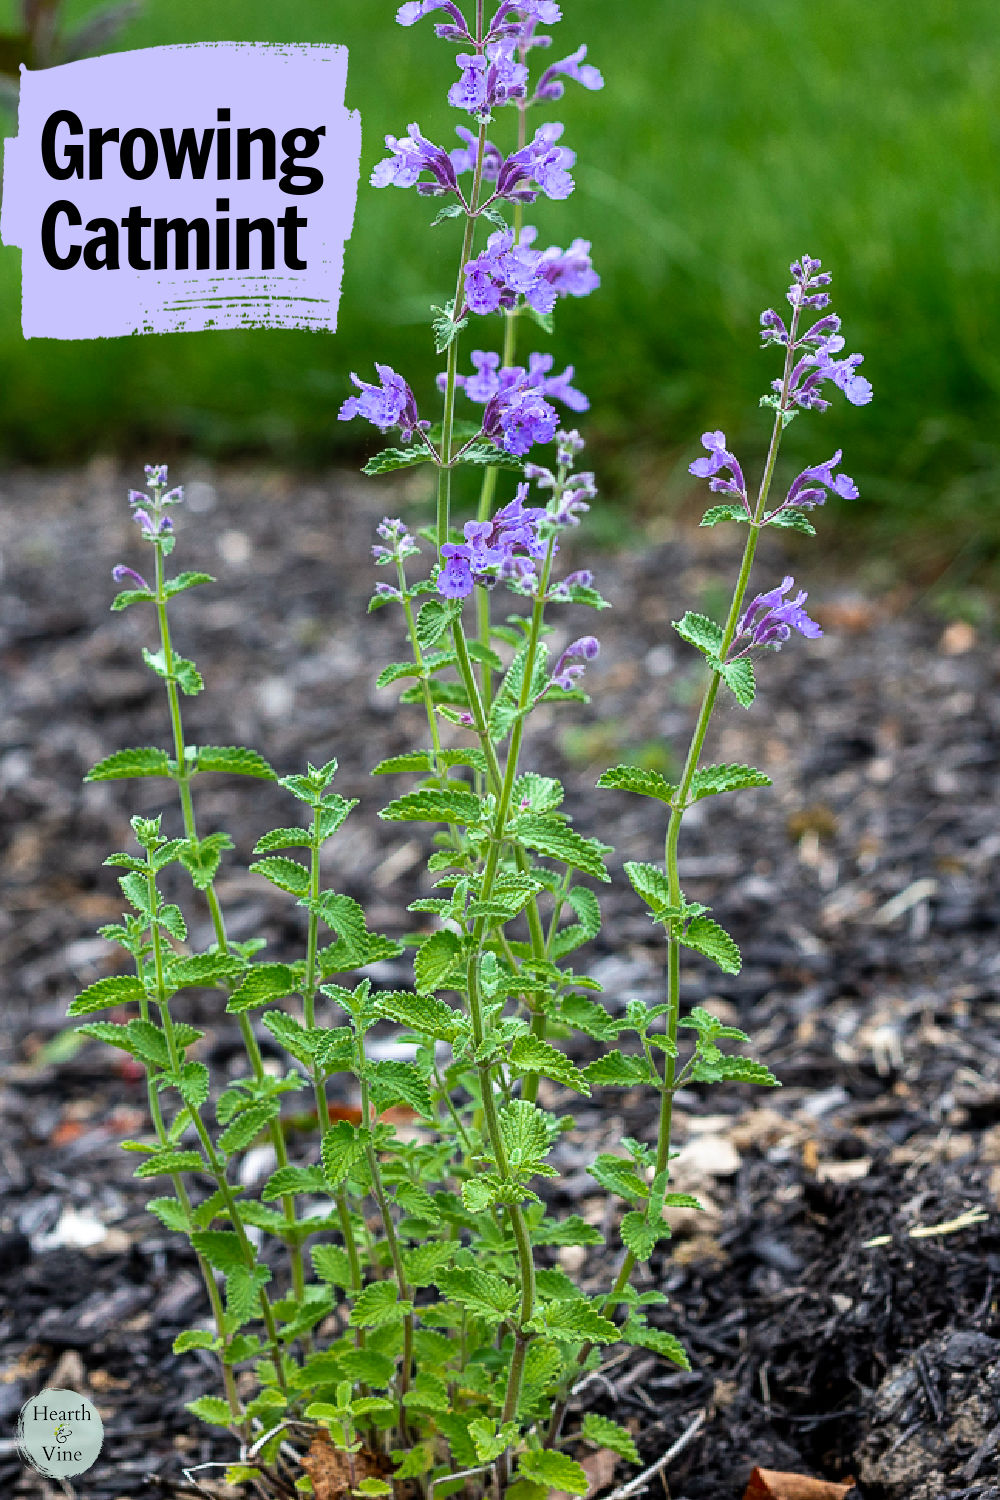 Small catmint plant in flower.